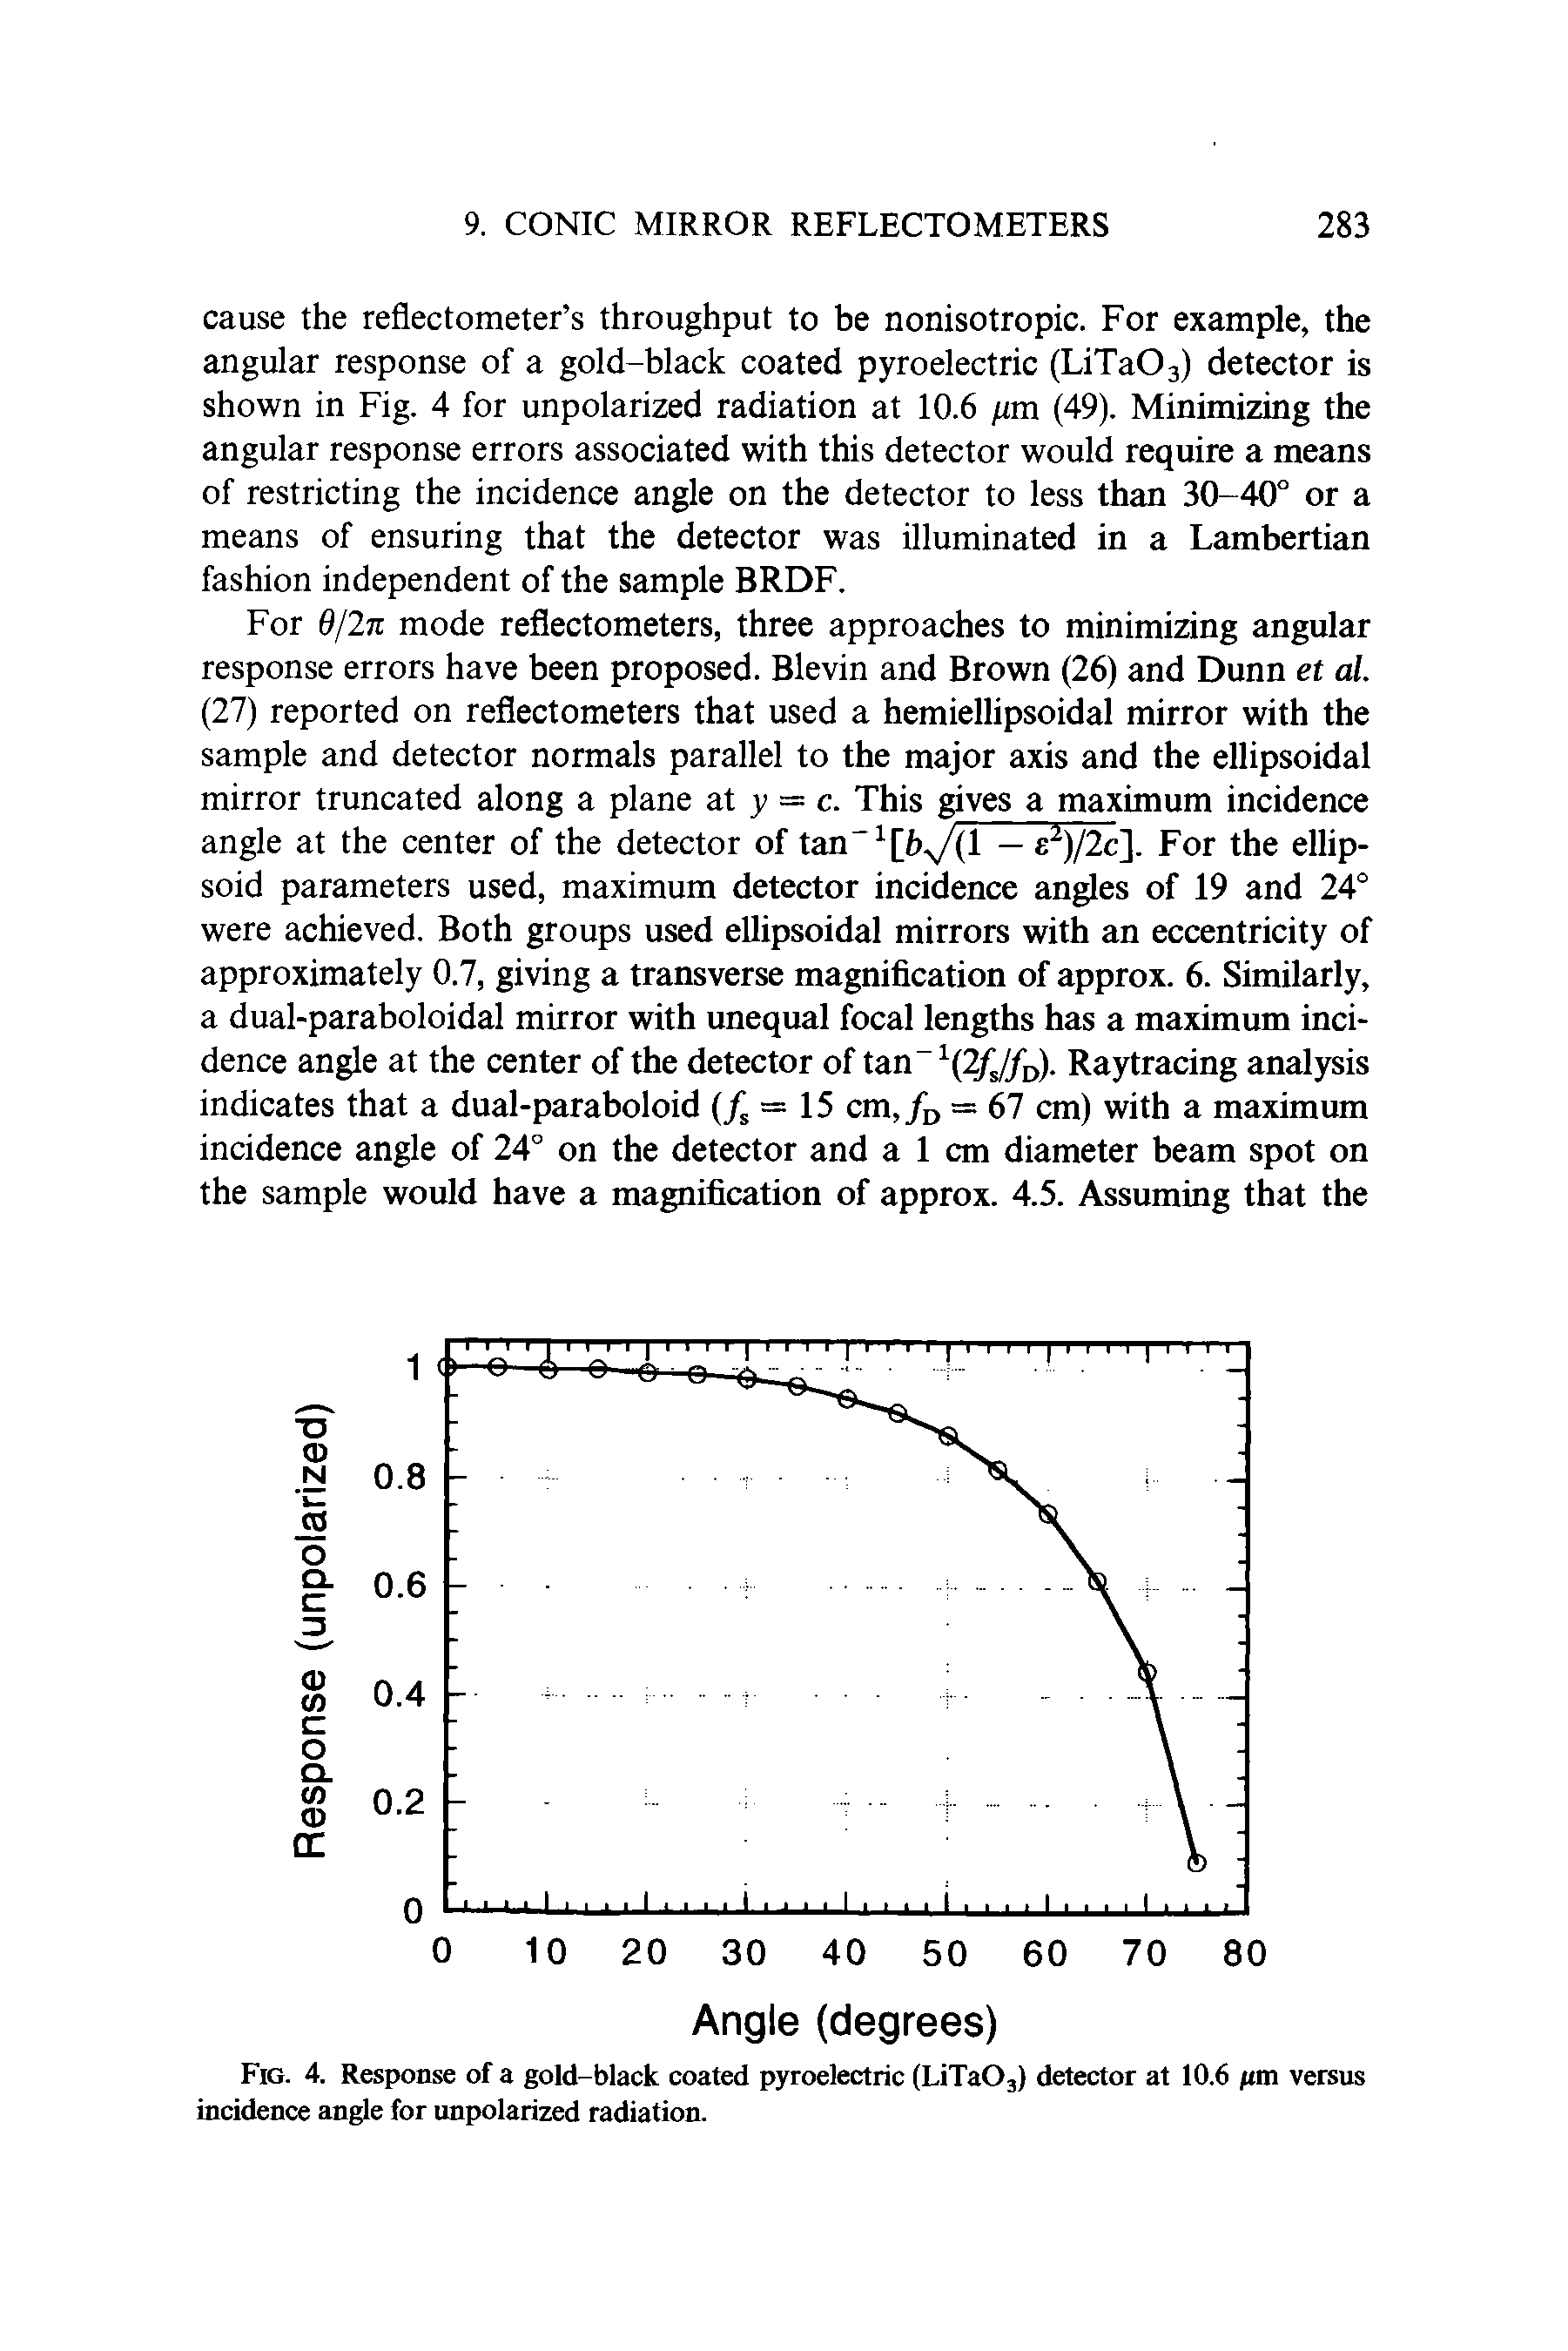 Fig. 4. Response of a gold-black coated pyroelectric (LiTaOj) detector at 10.6 fan versus incidence angle for unpolarized radiation.